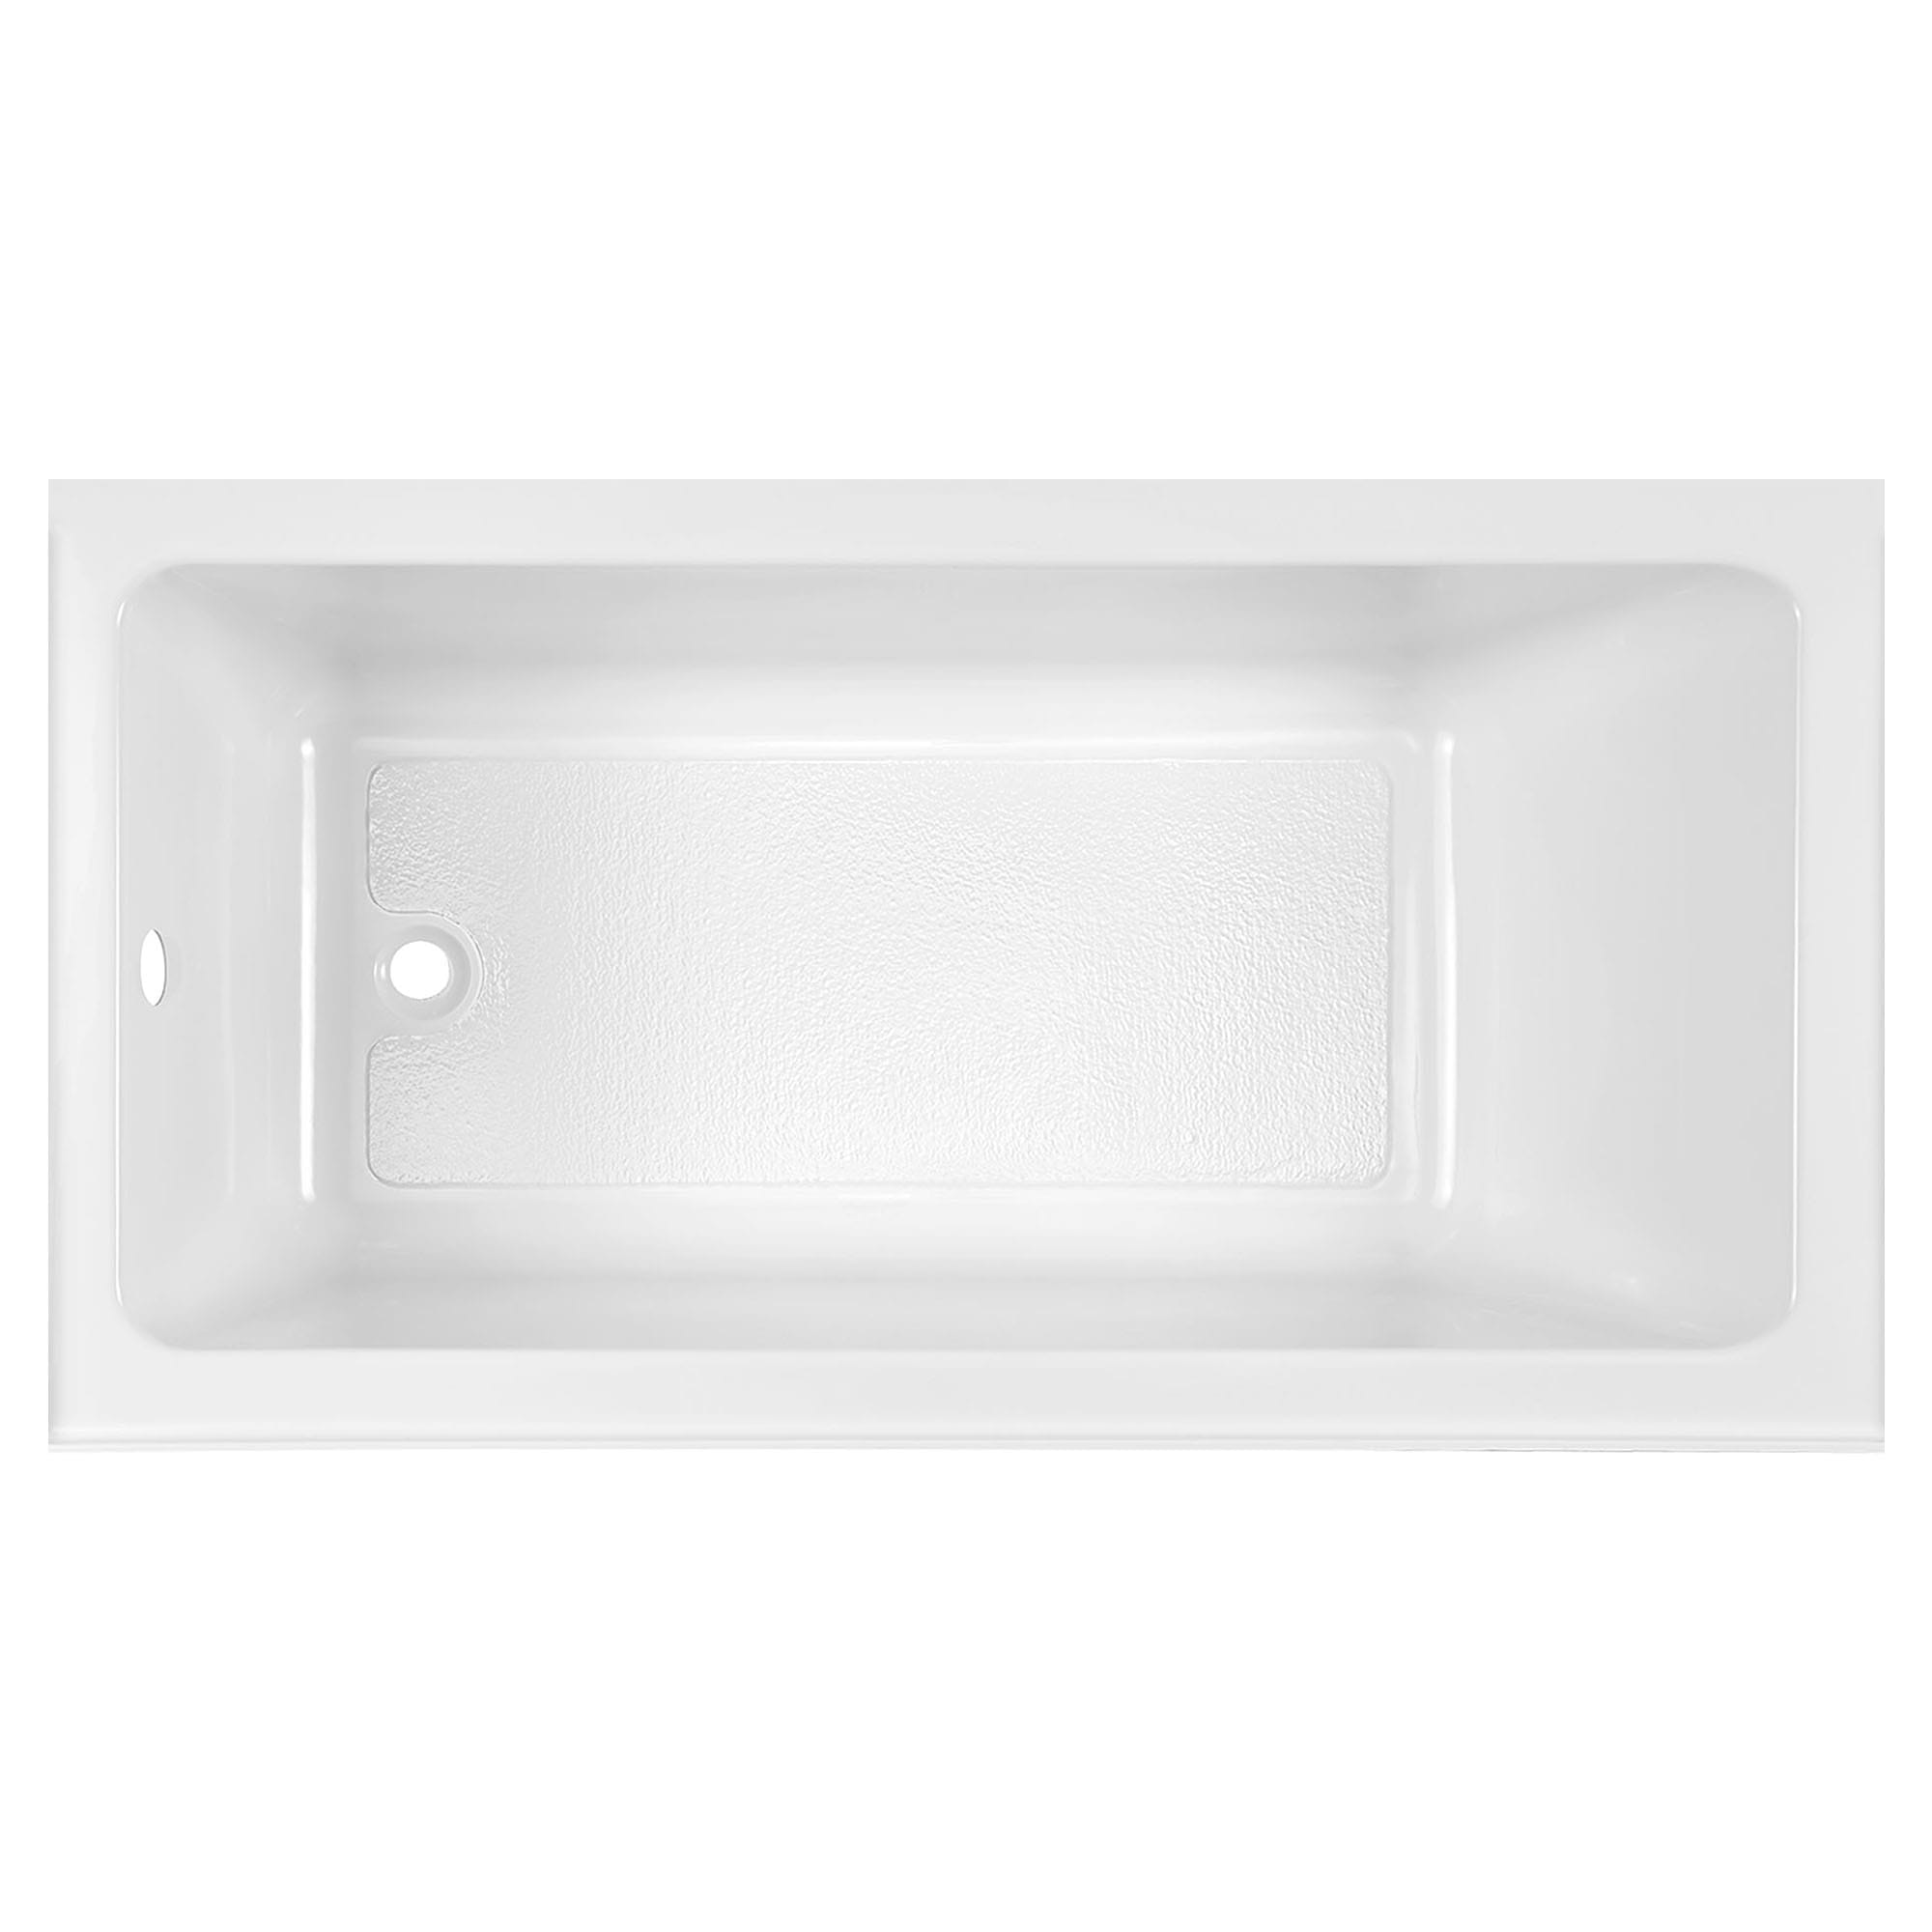 Studio 60 x 32 Inch Integral Apron Bathtub Above Floor Rough With Left Hand Outlet ARCTIC